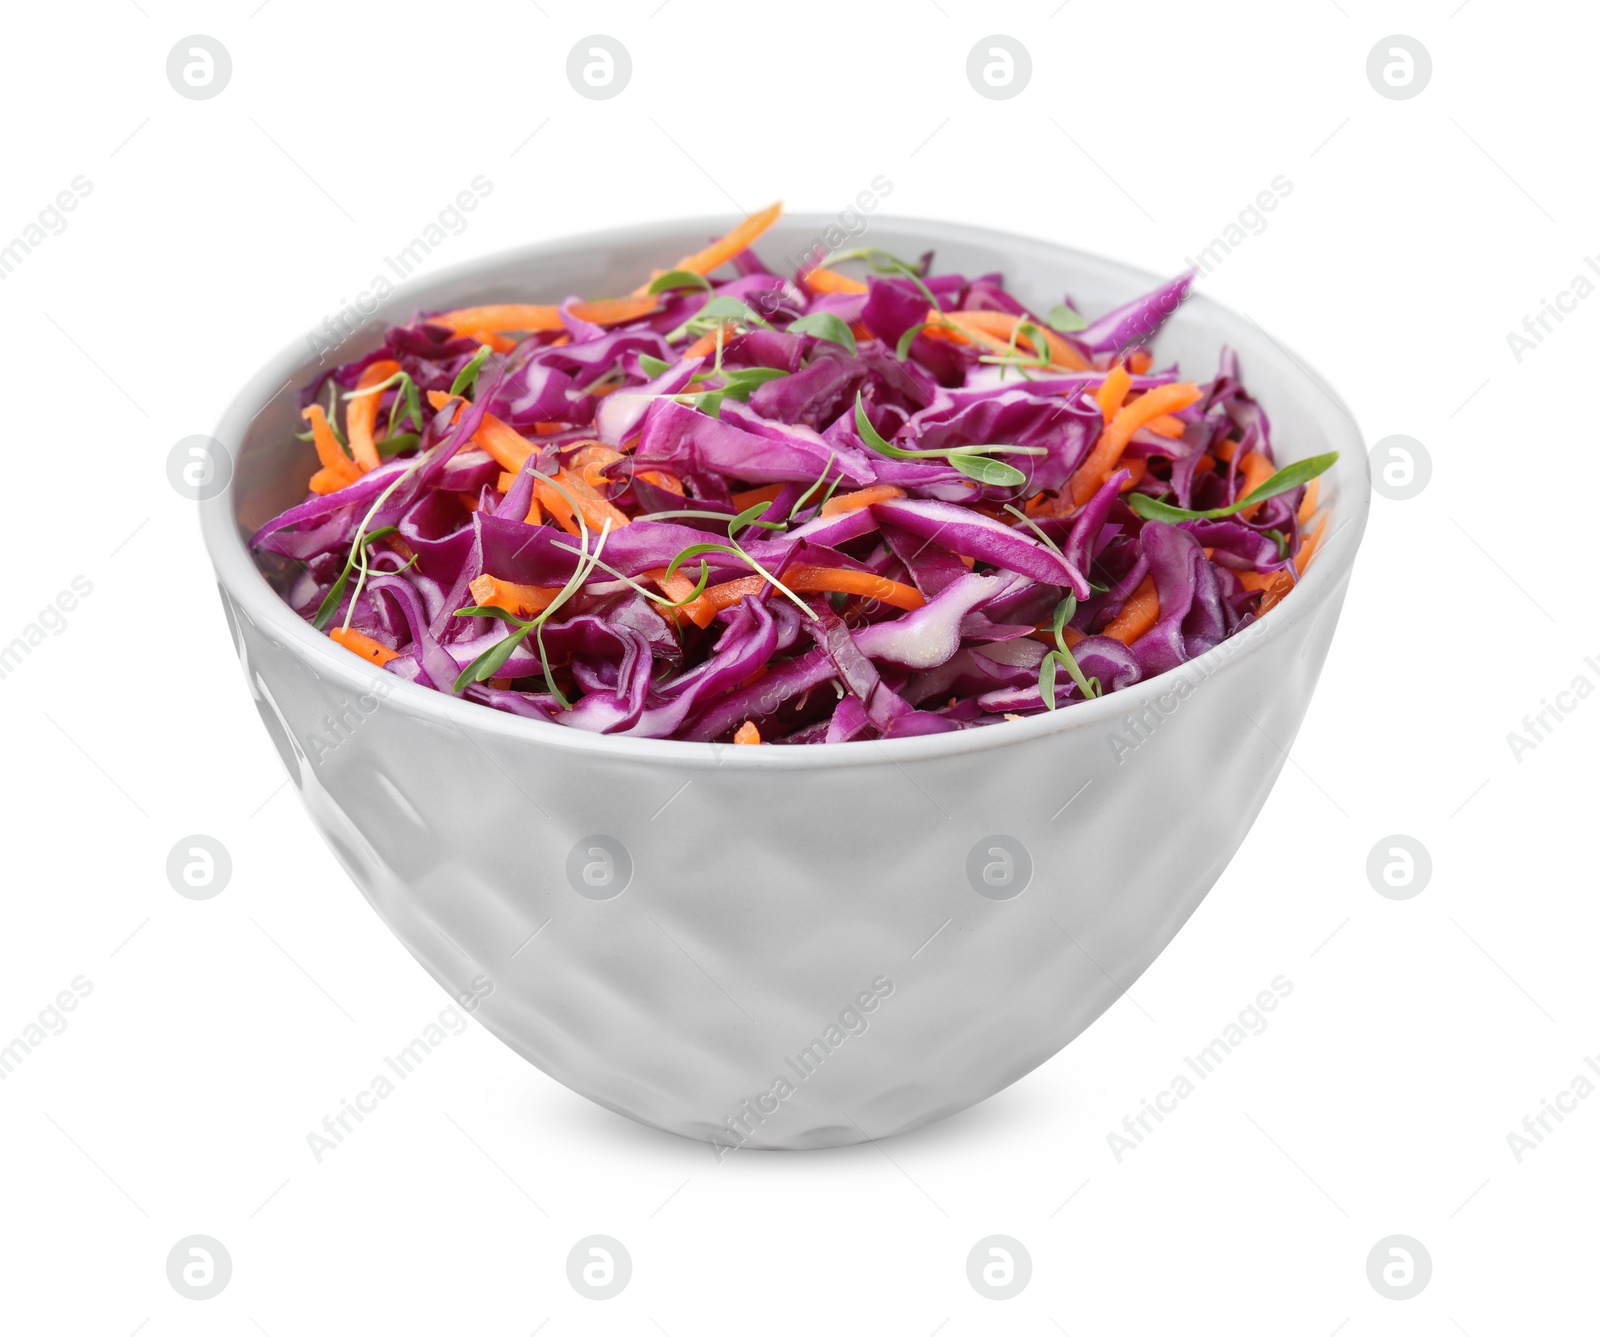 Photo of Tasty salad with red cabbage in bowl isolated on white